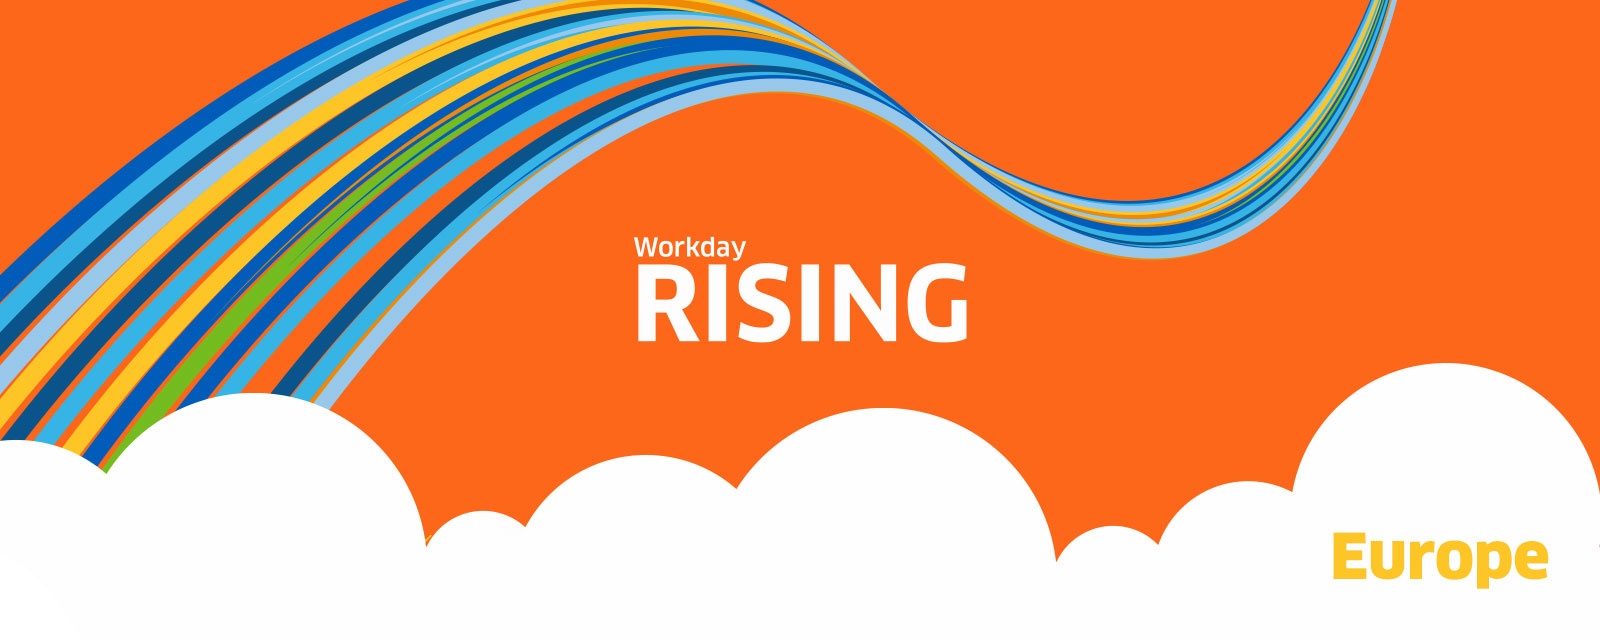 Workday Rising Europe Daily Innovation at Work Workday US